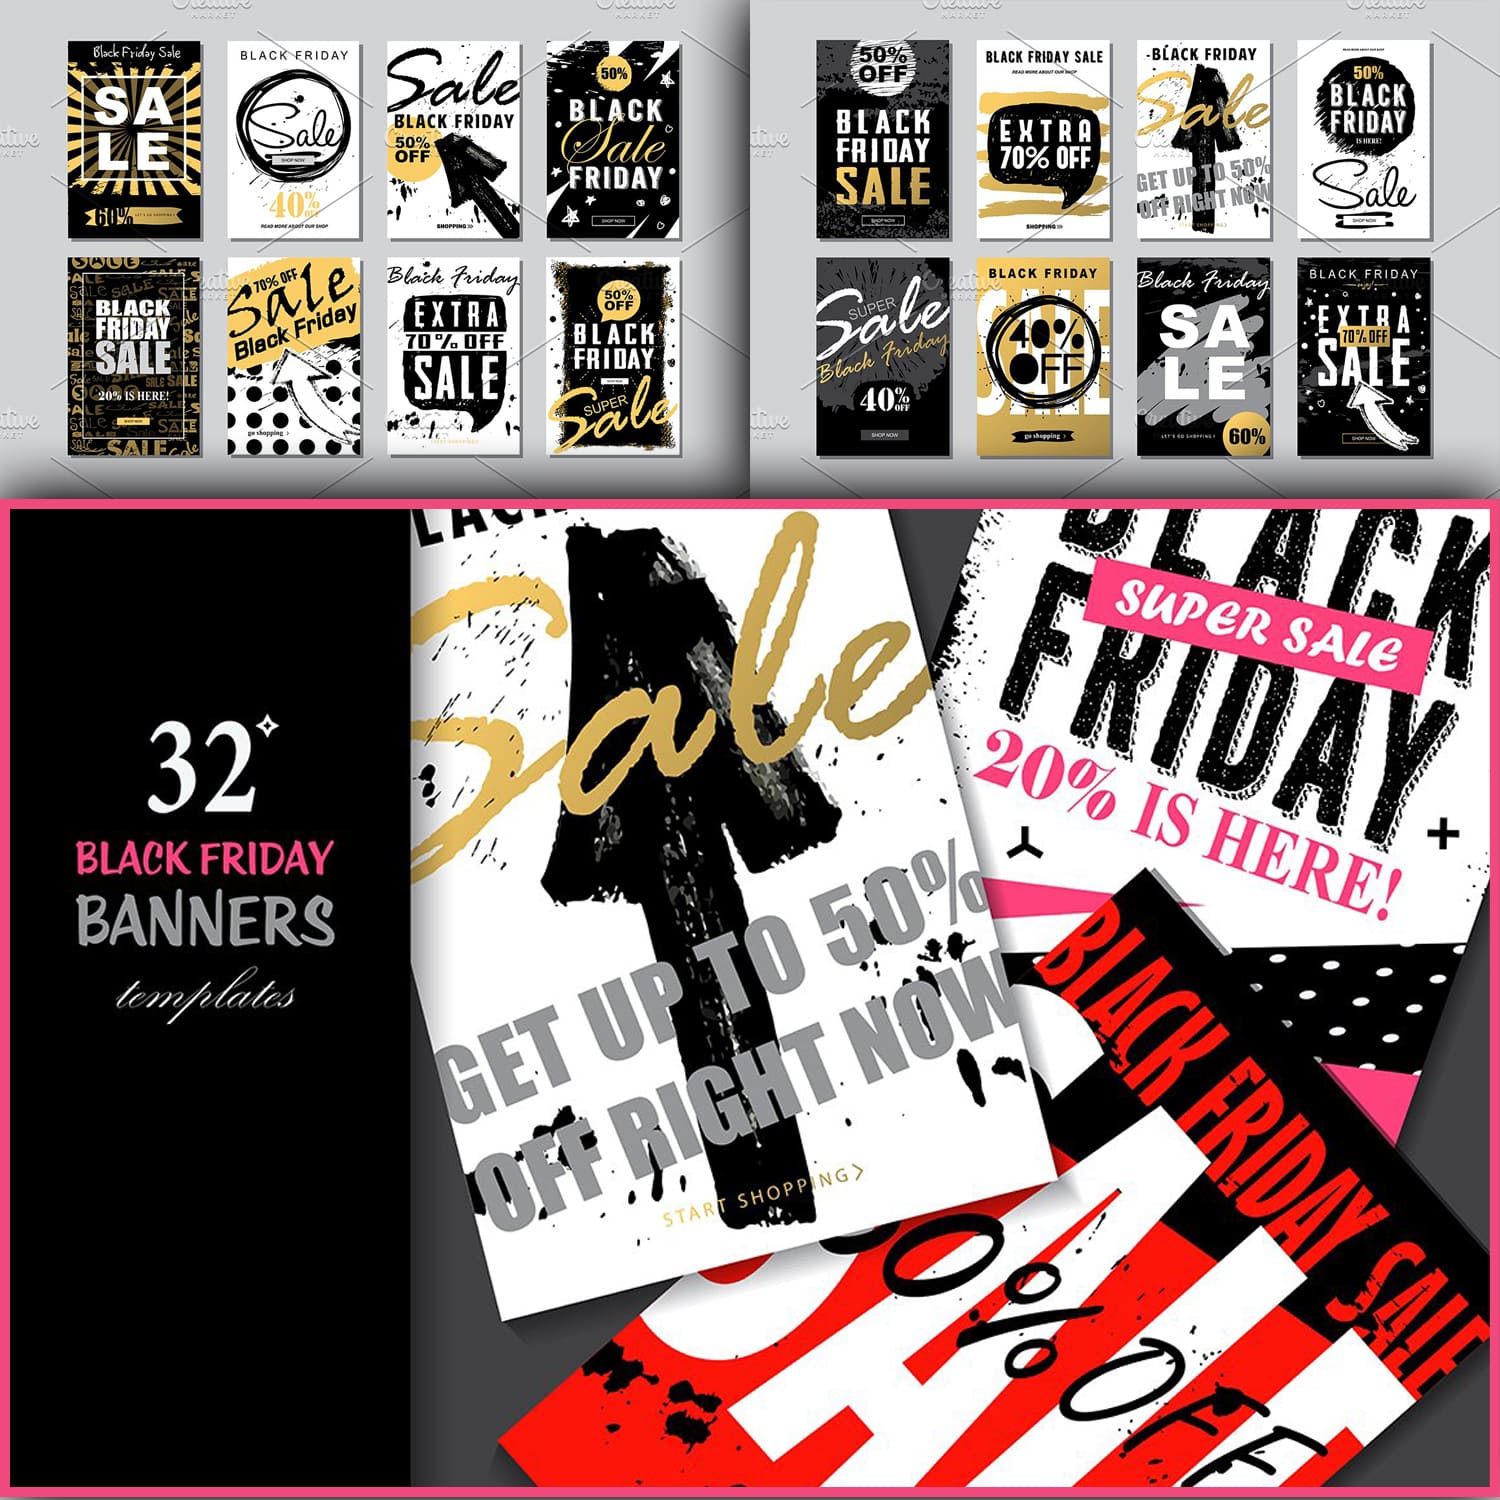 Black Friday Banners Templates Cover.